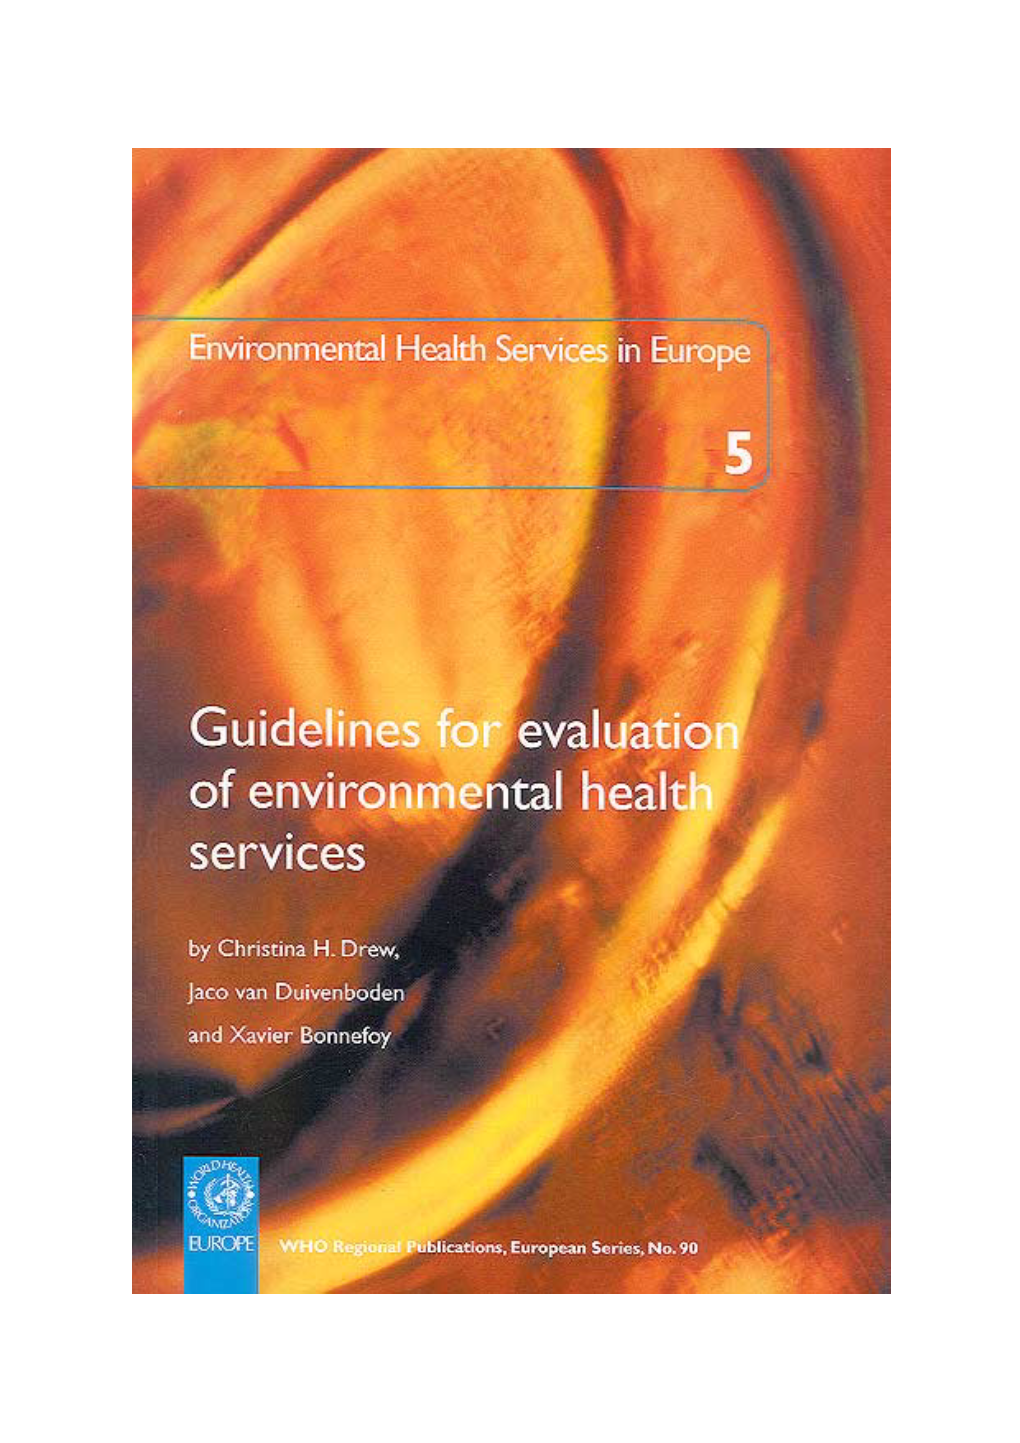 Environmental Health Services in Europe 5. Guidelines for Evaluation of Environmental Health Services